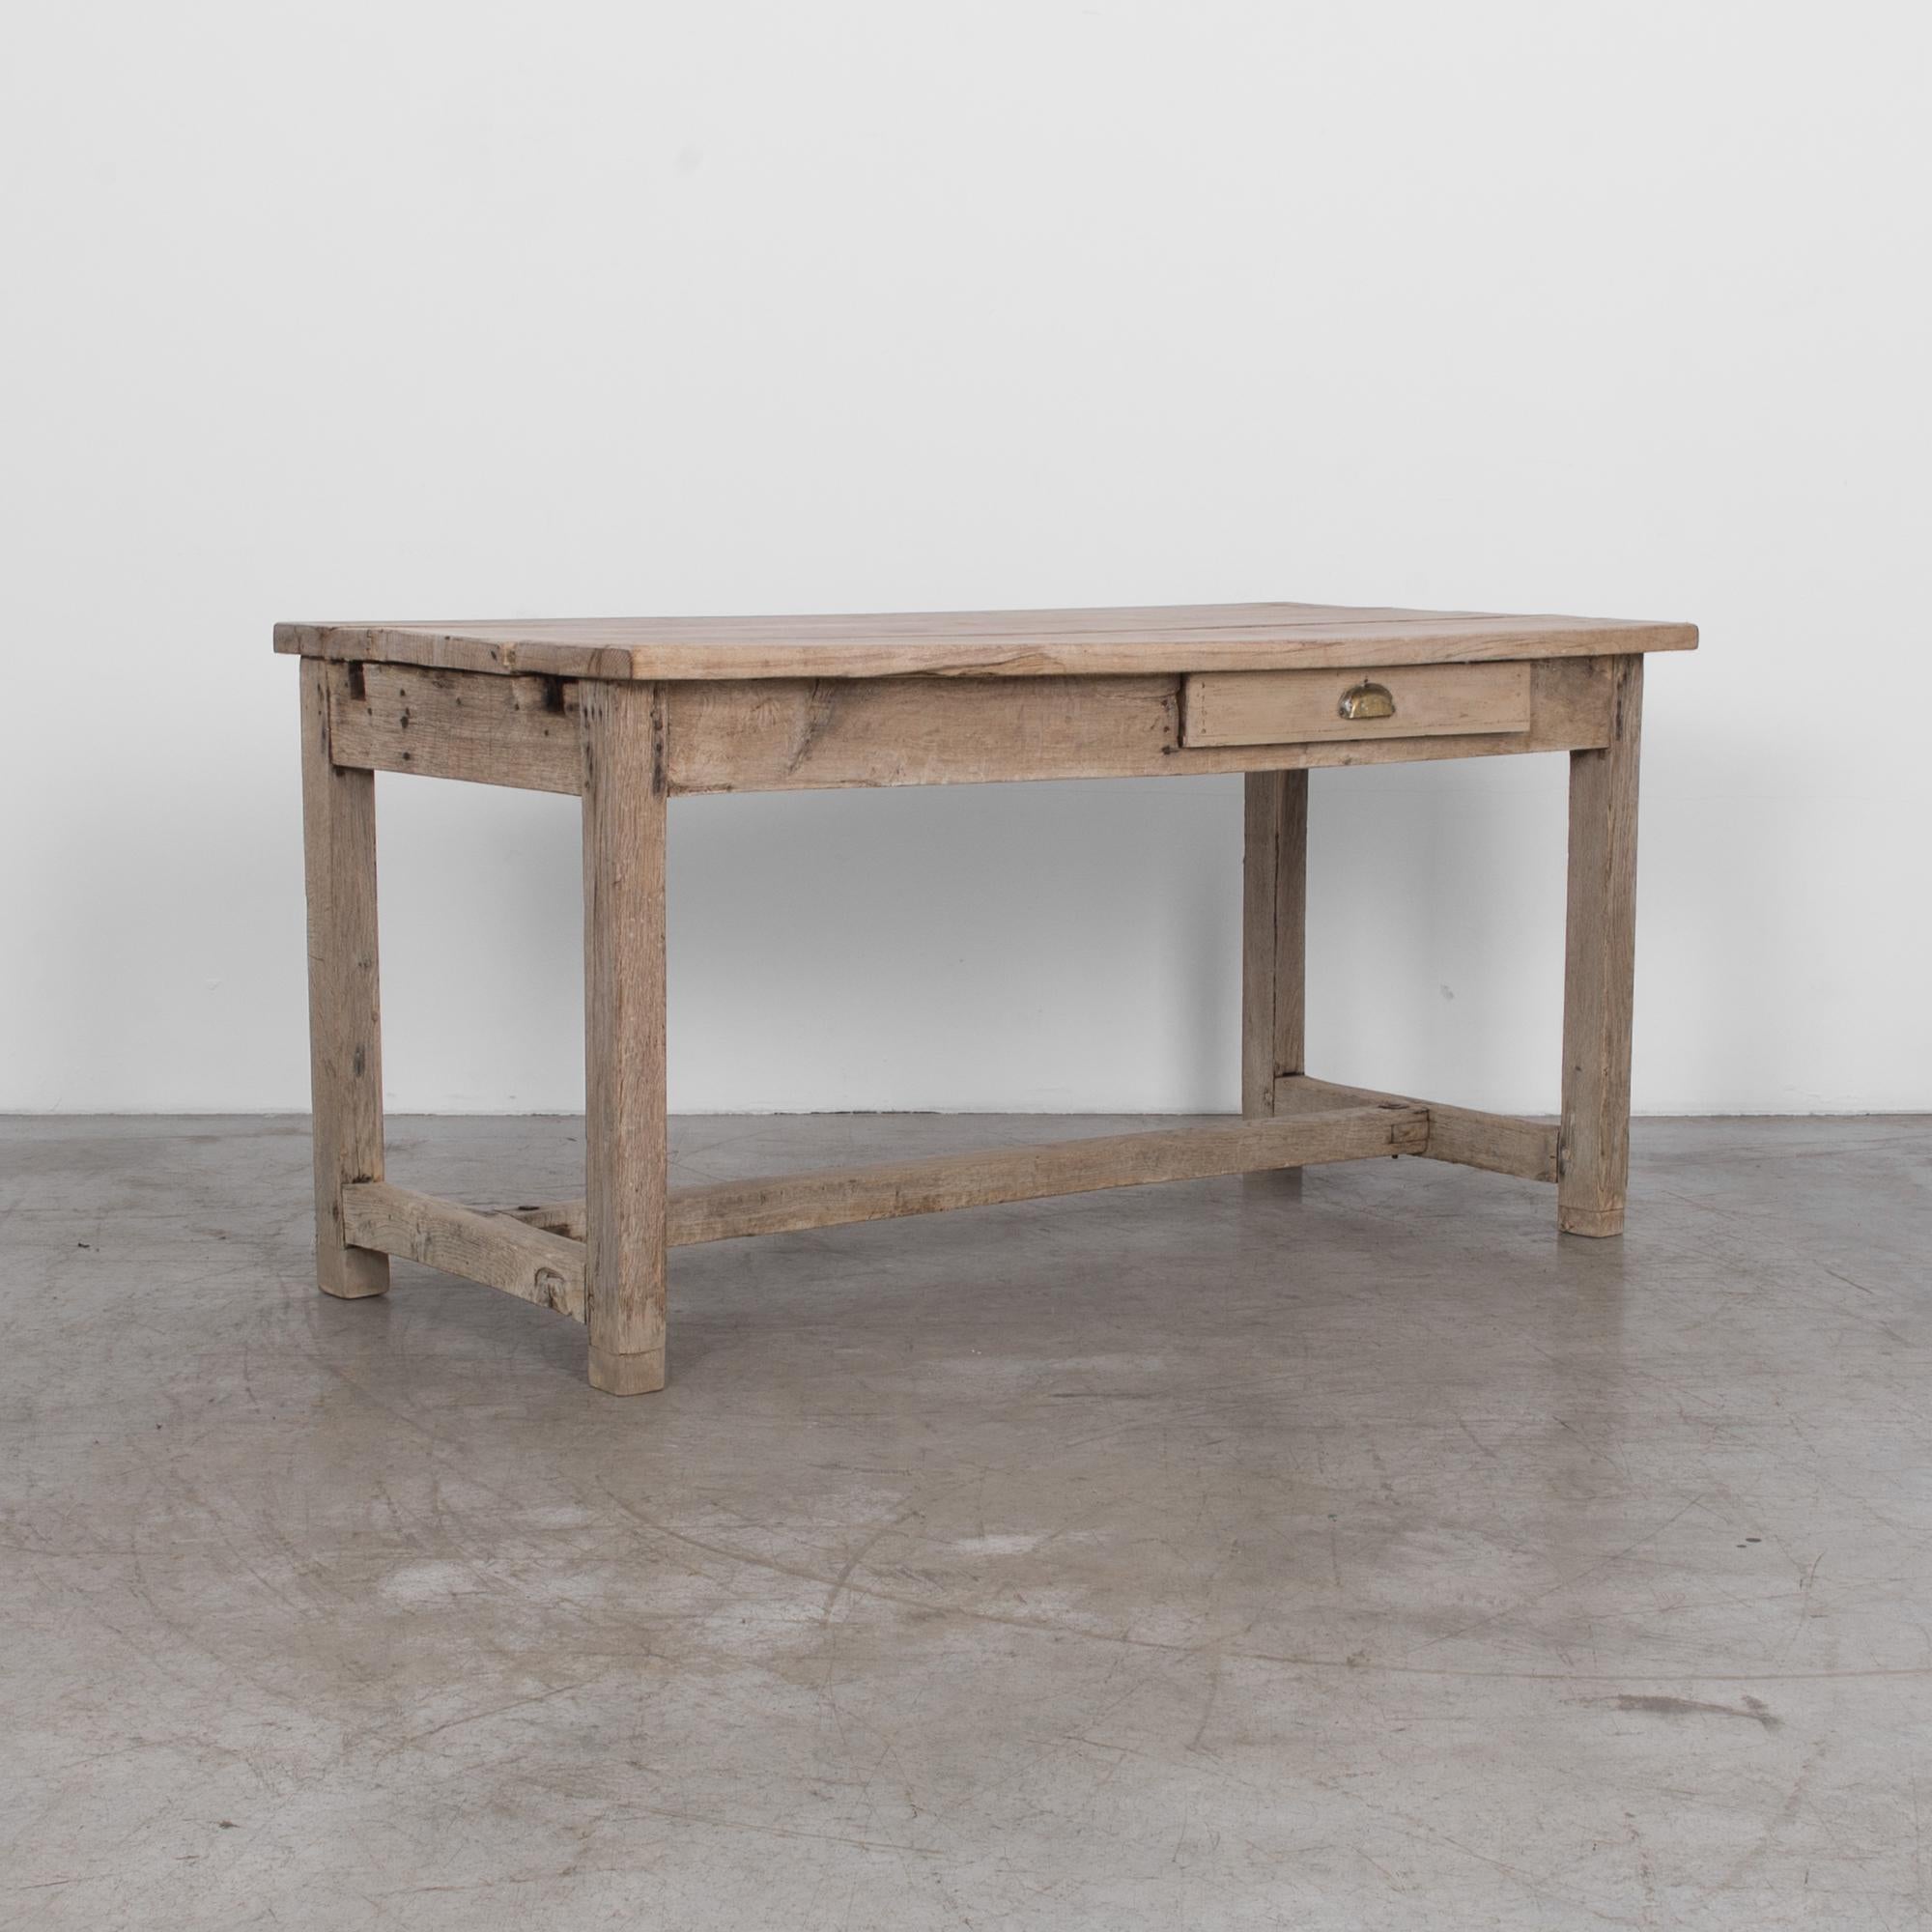 Simple and rustic table made from solid oak, cleaned and finished with a nourishing natural oil. From late 19th century France, this table is has a storied past, and a long future; made from the highest-quality materials, and traditional